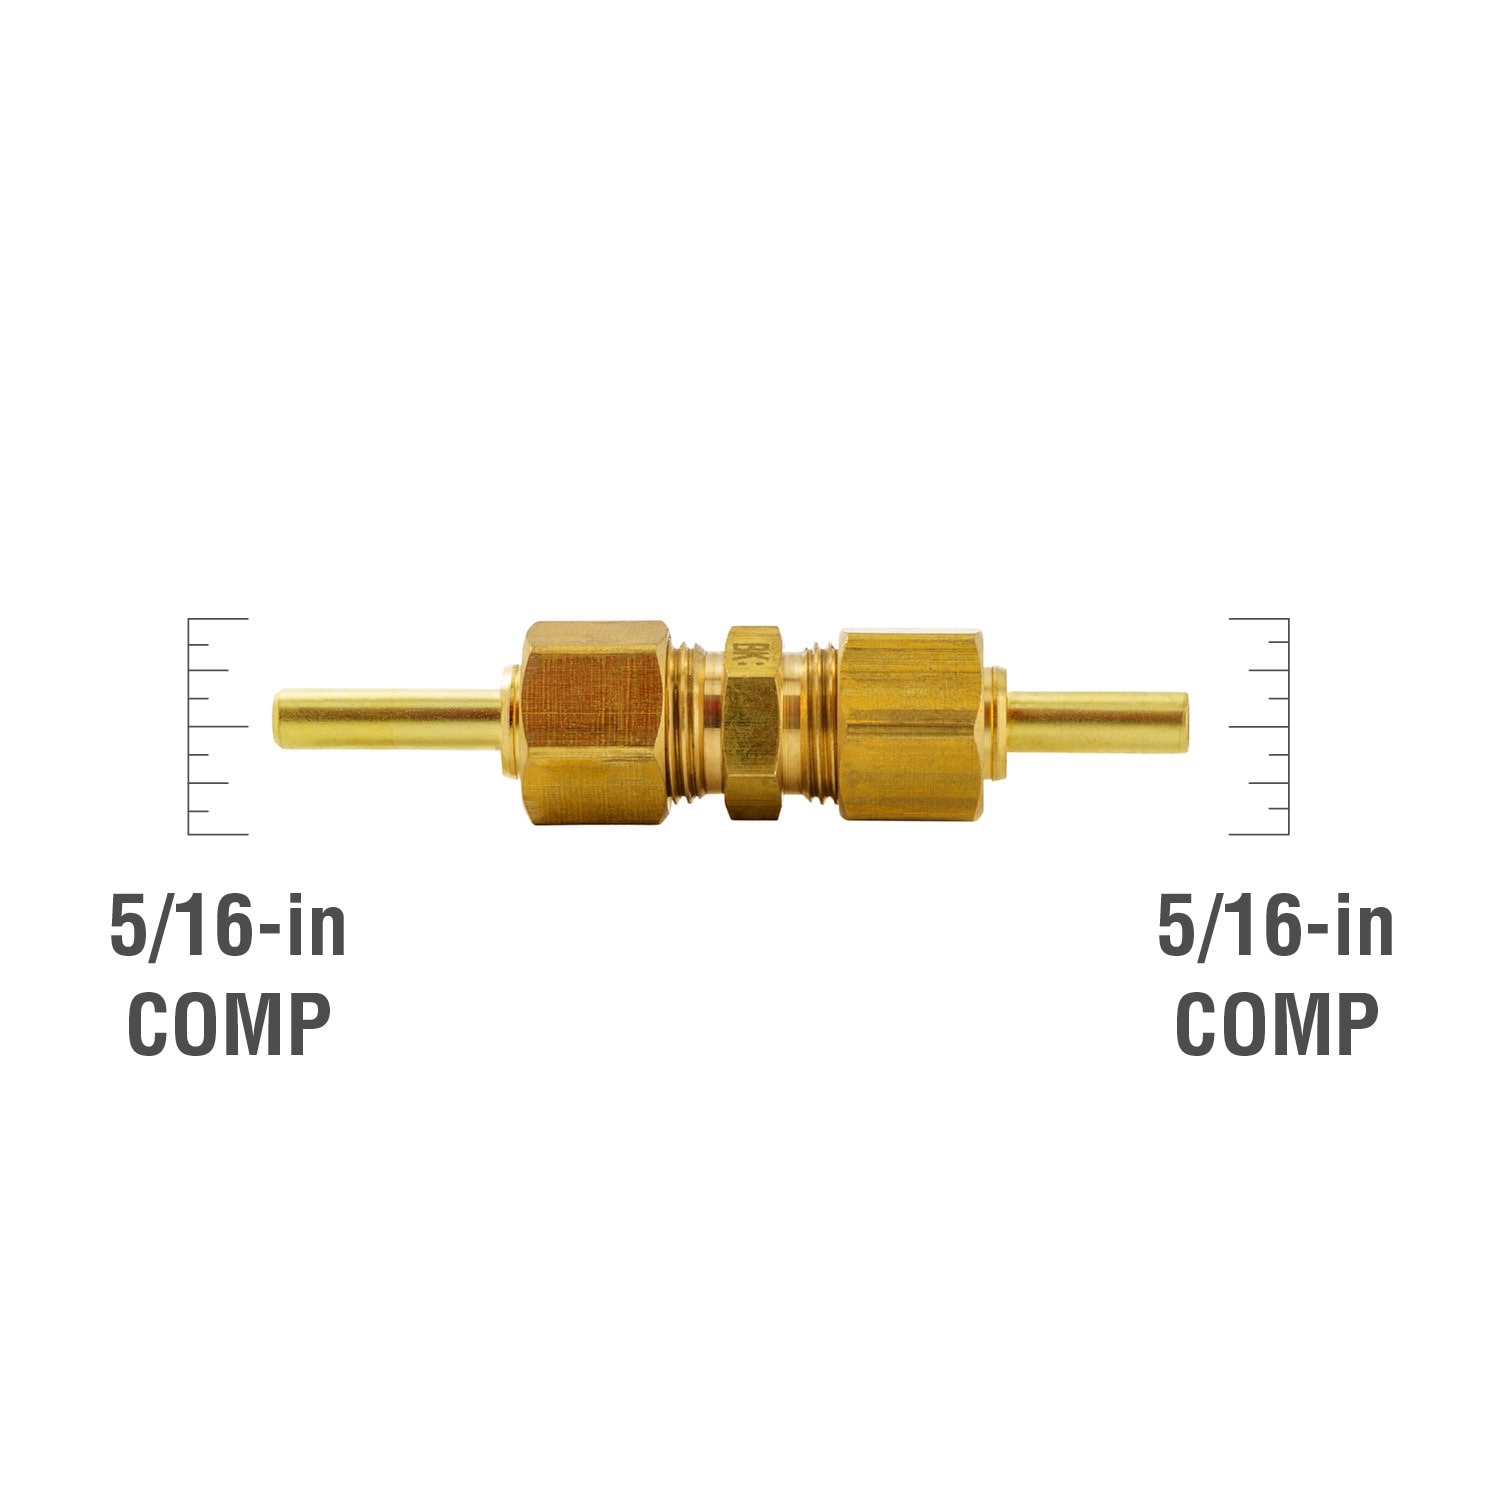 Proline Series 5/8-in x 5/8-in Compression Coupling Union Fitting